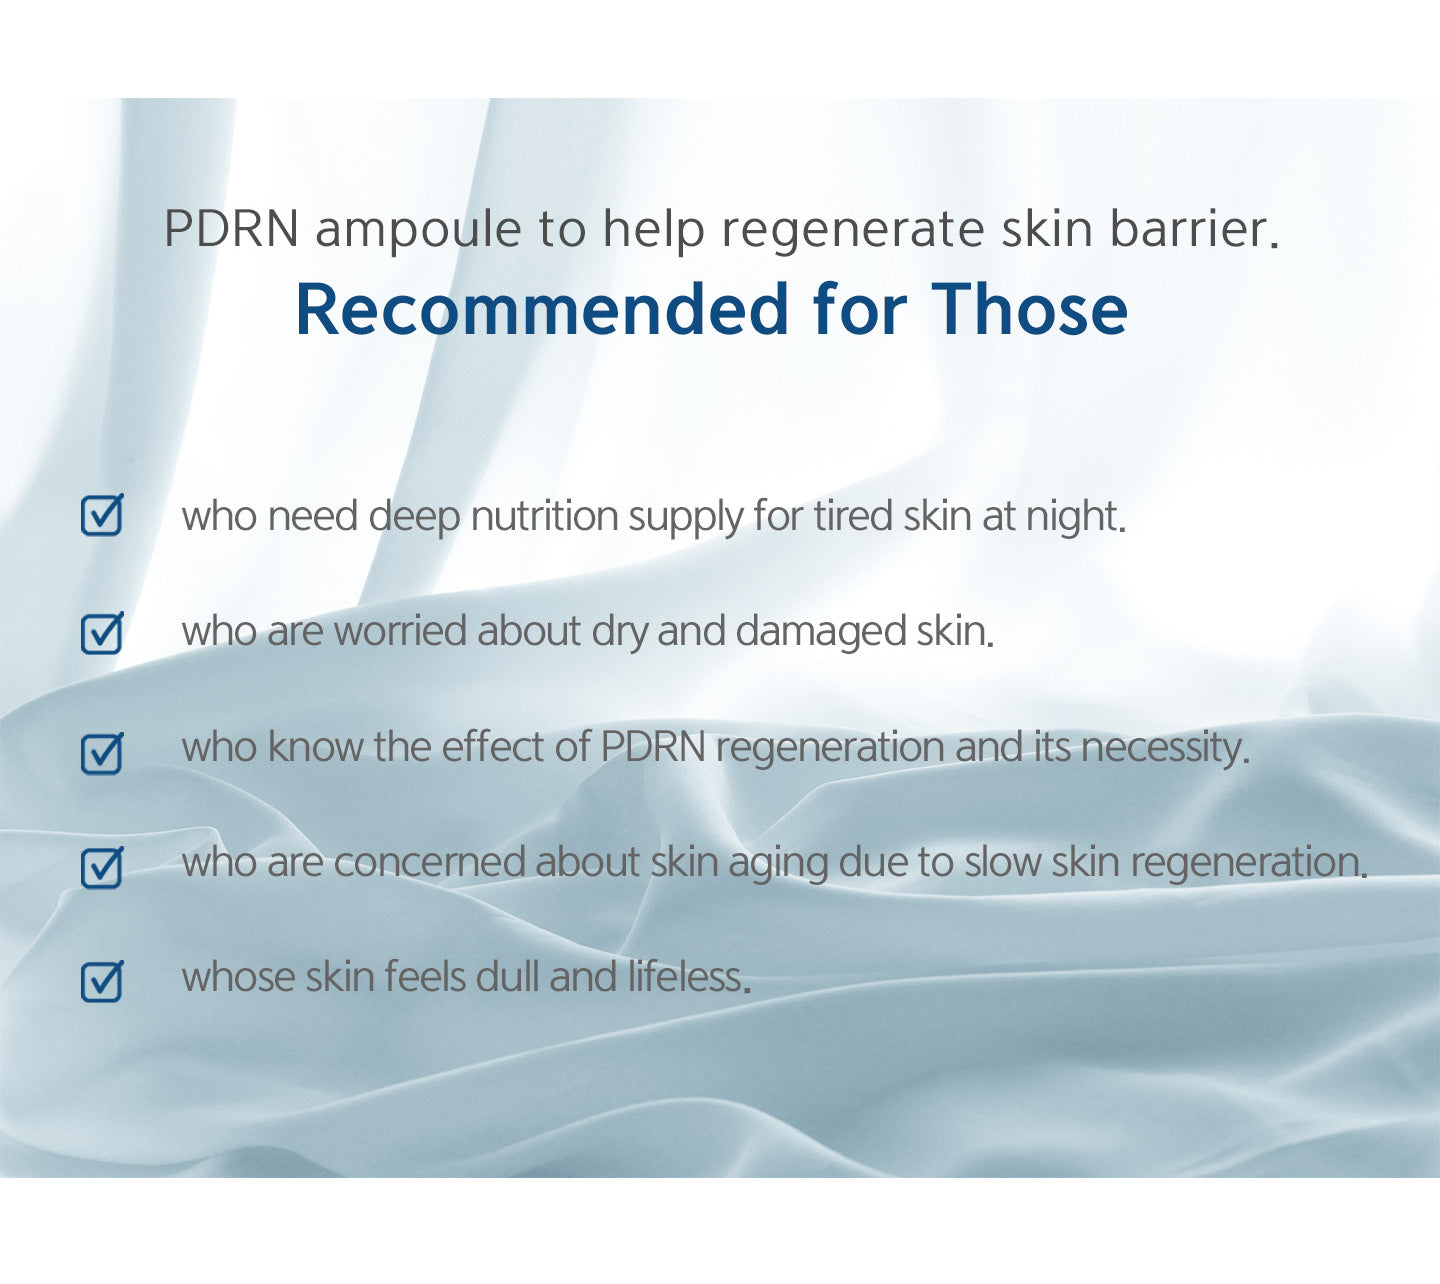 PDRN ampoule to help regenerate skin barrier. Recommended for those who need deep nutrition supply for tired skin at night, who are worried about dry and damaged skin, know the effect of PDRN regeneration and its necessity, are concerned about skin aging